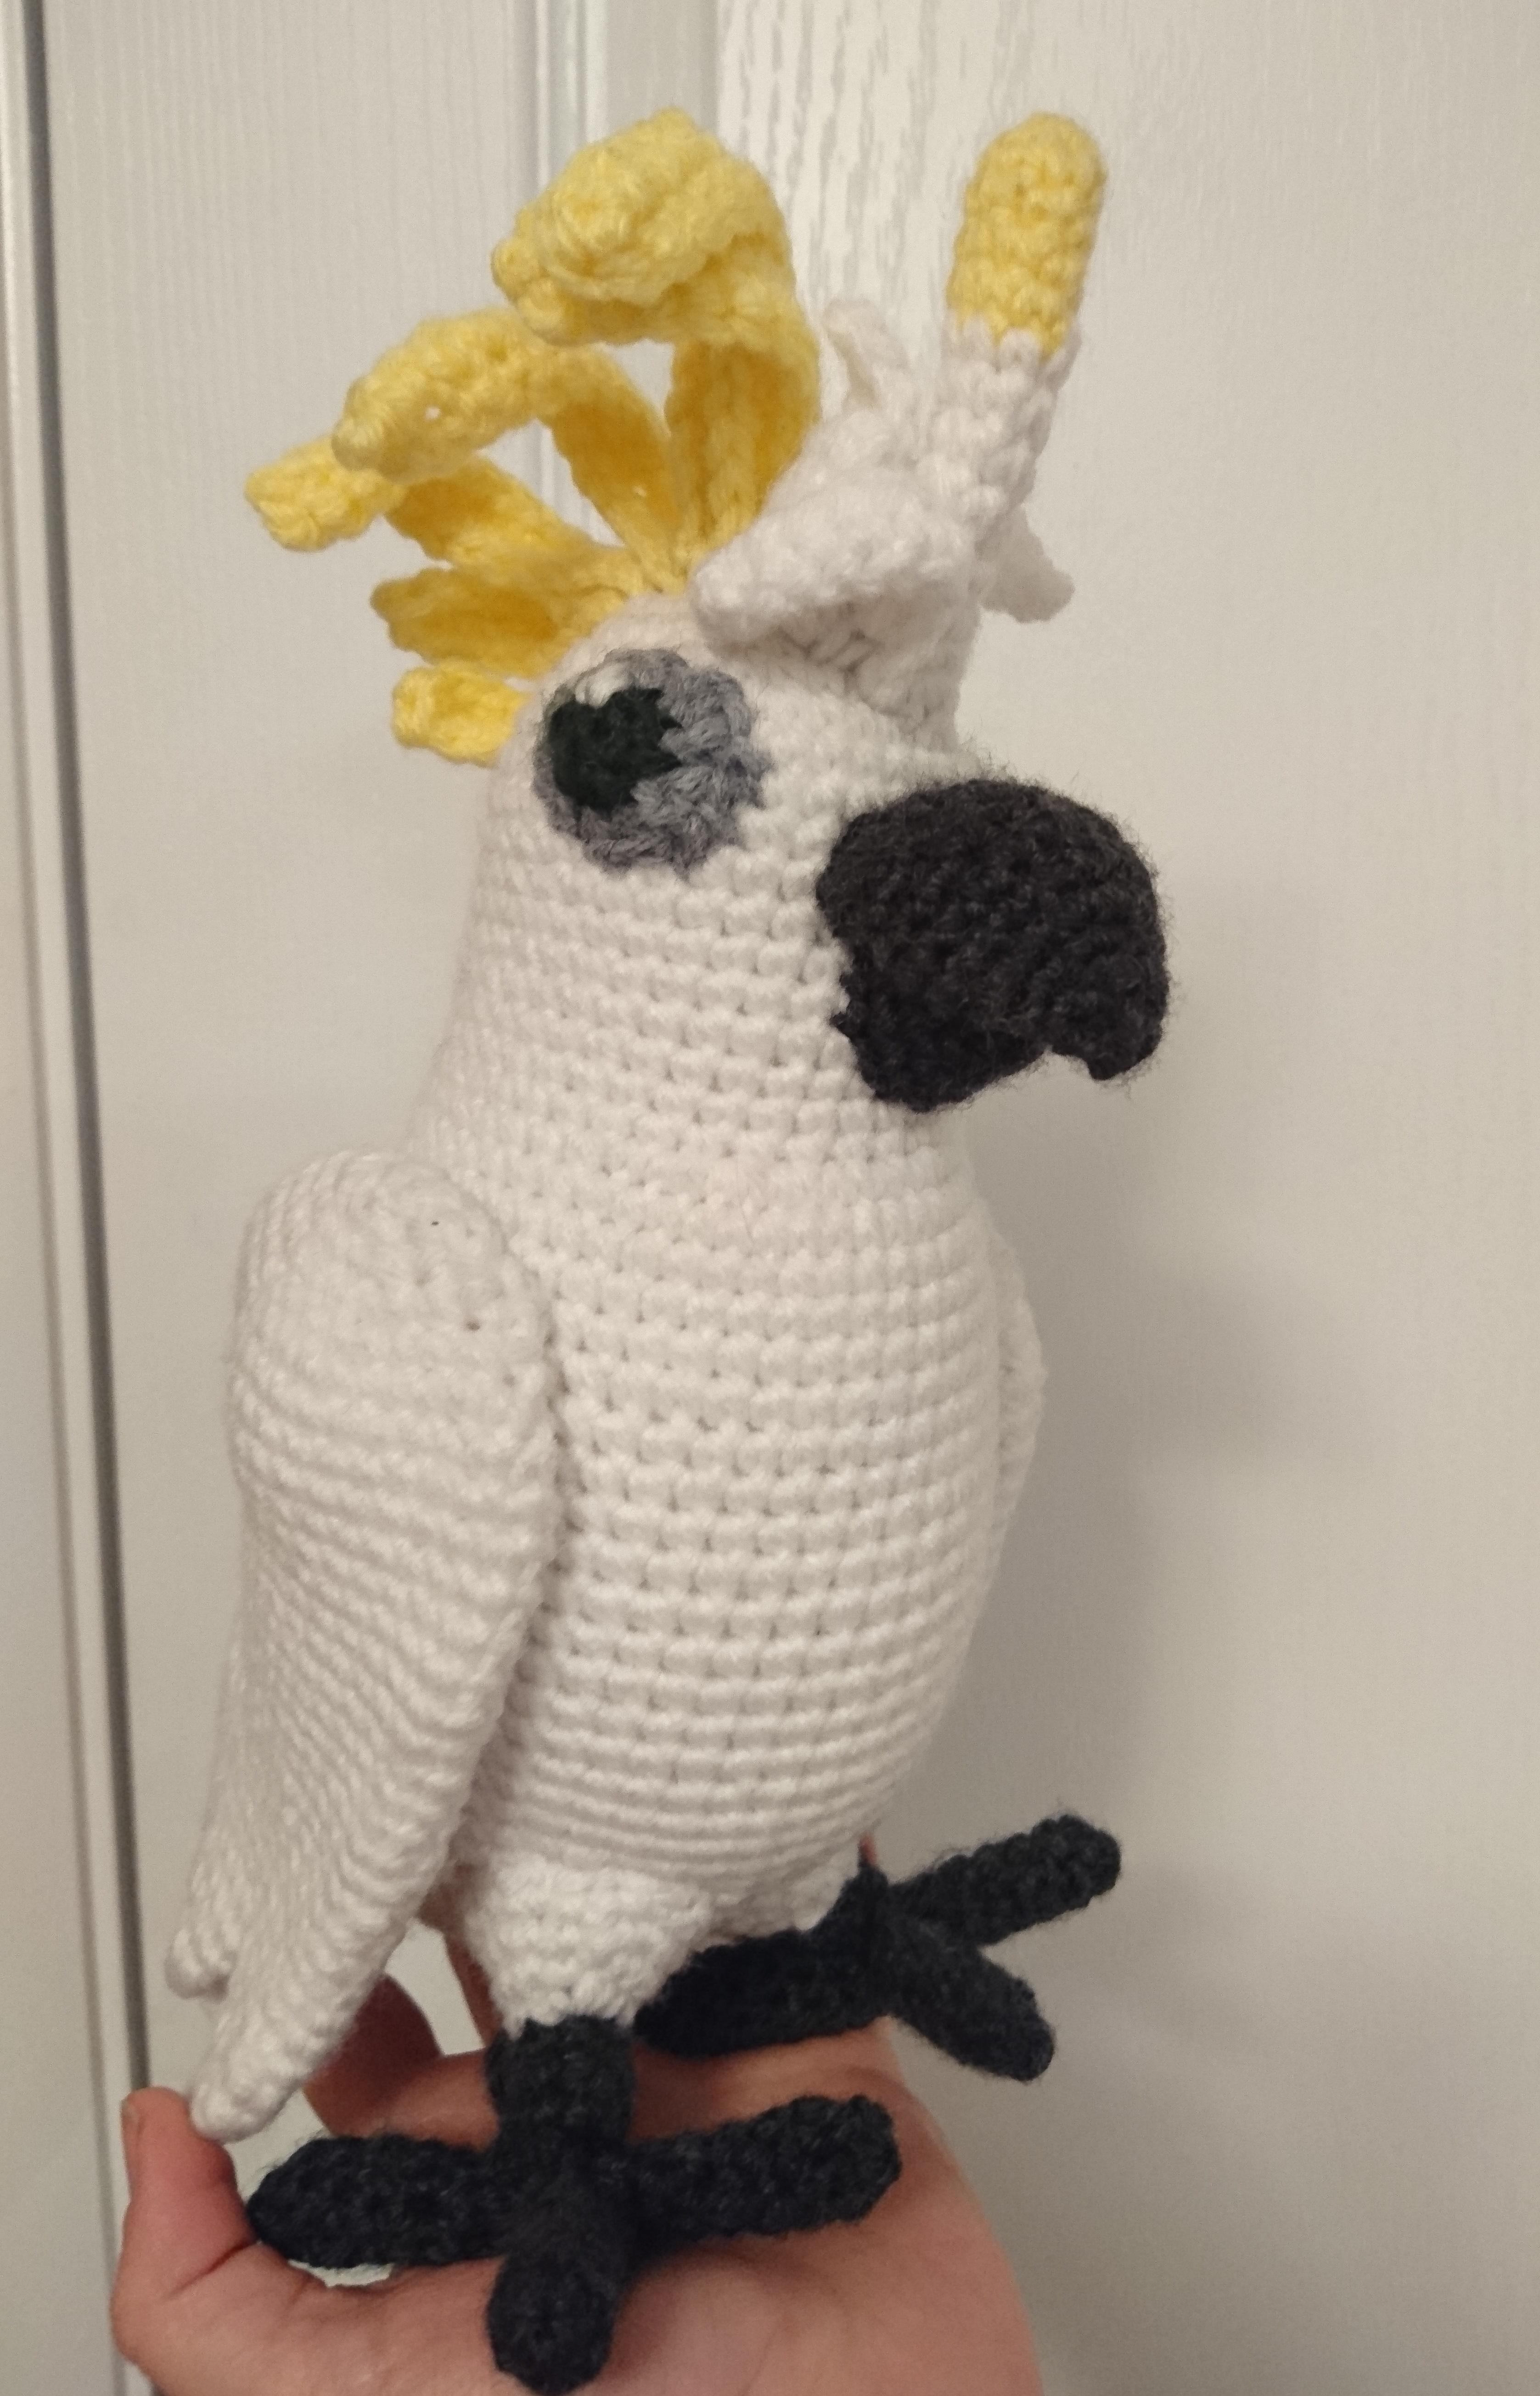 Crochet Parrot Pattern Crochet Parrot Cockatoo Used Pattern From Internet For A Base